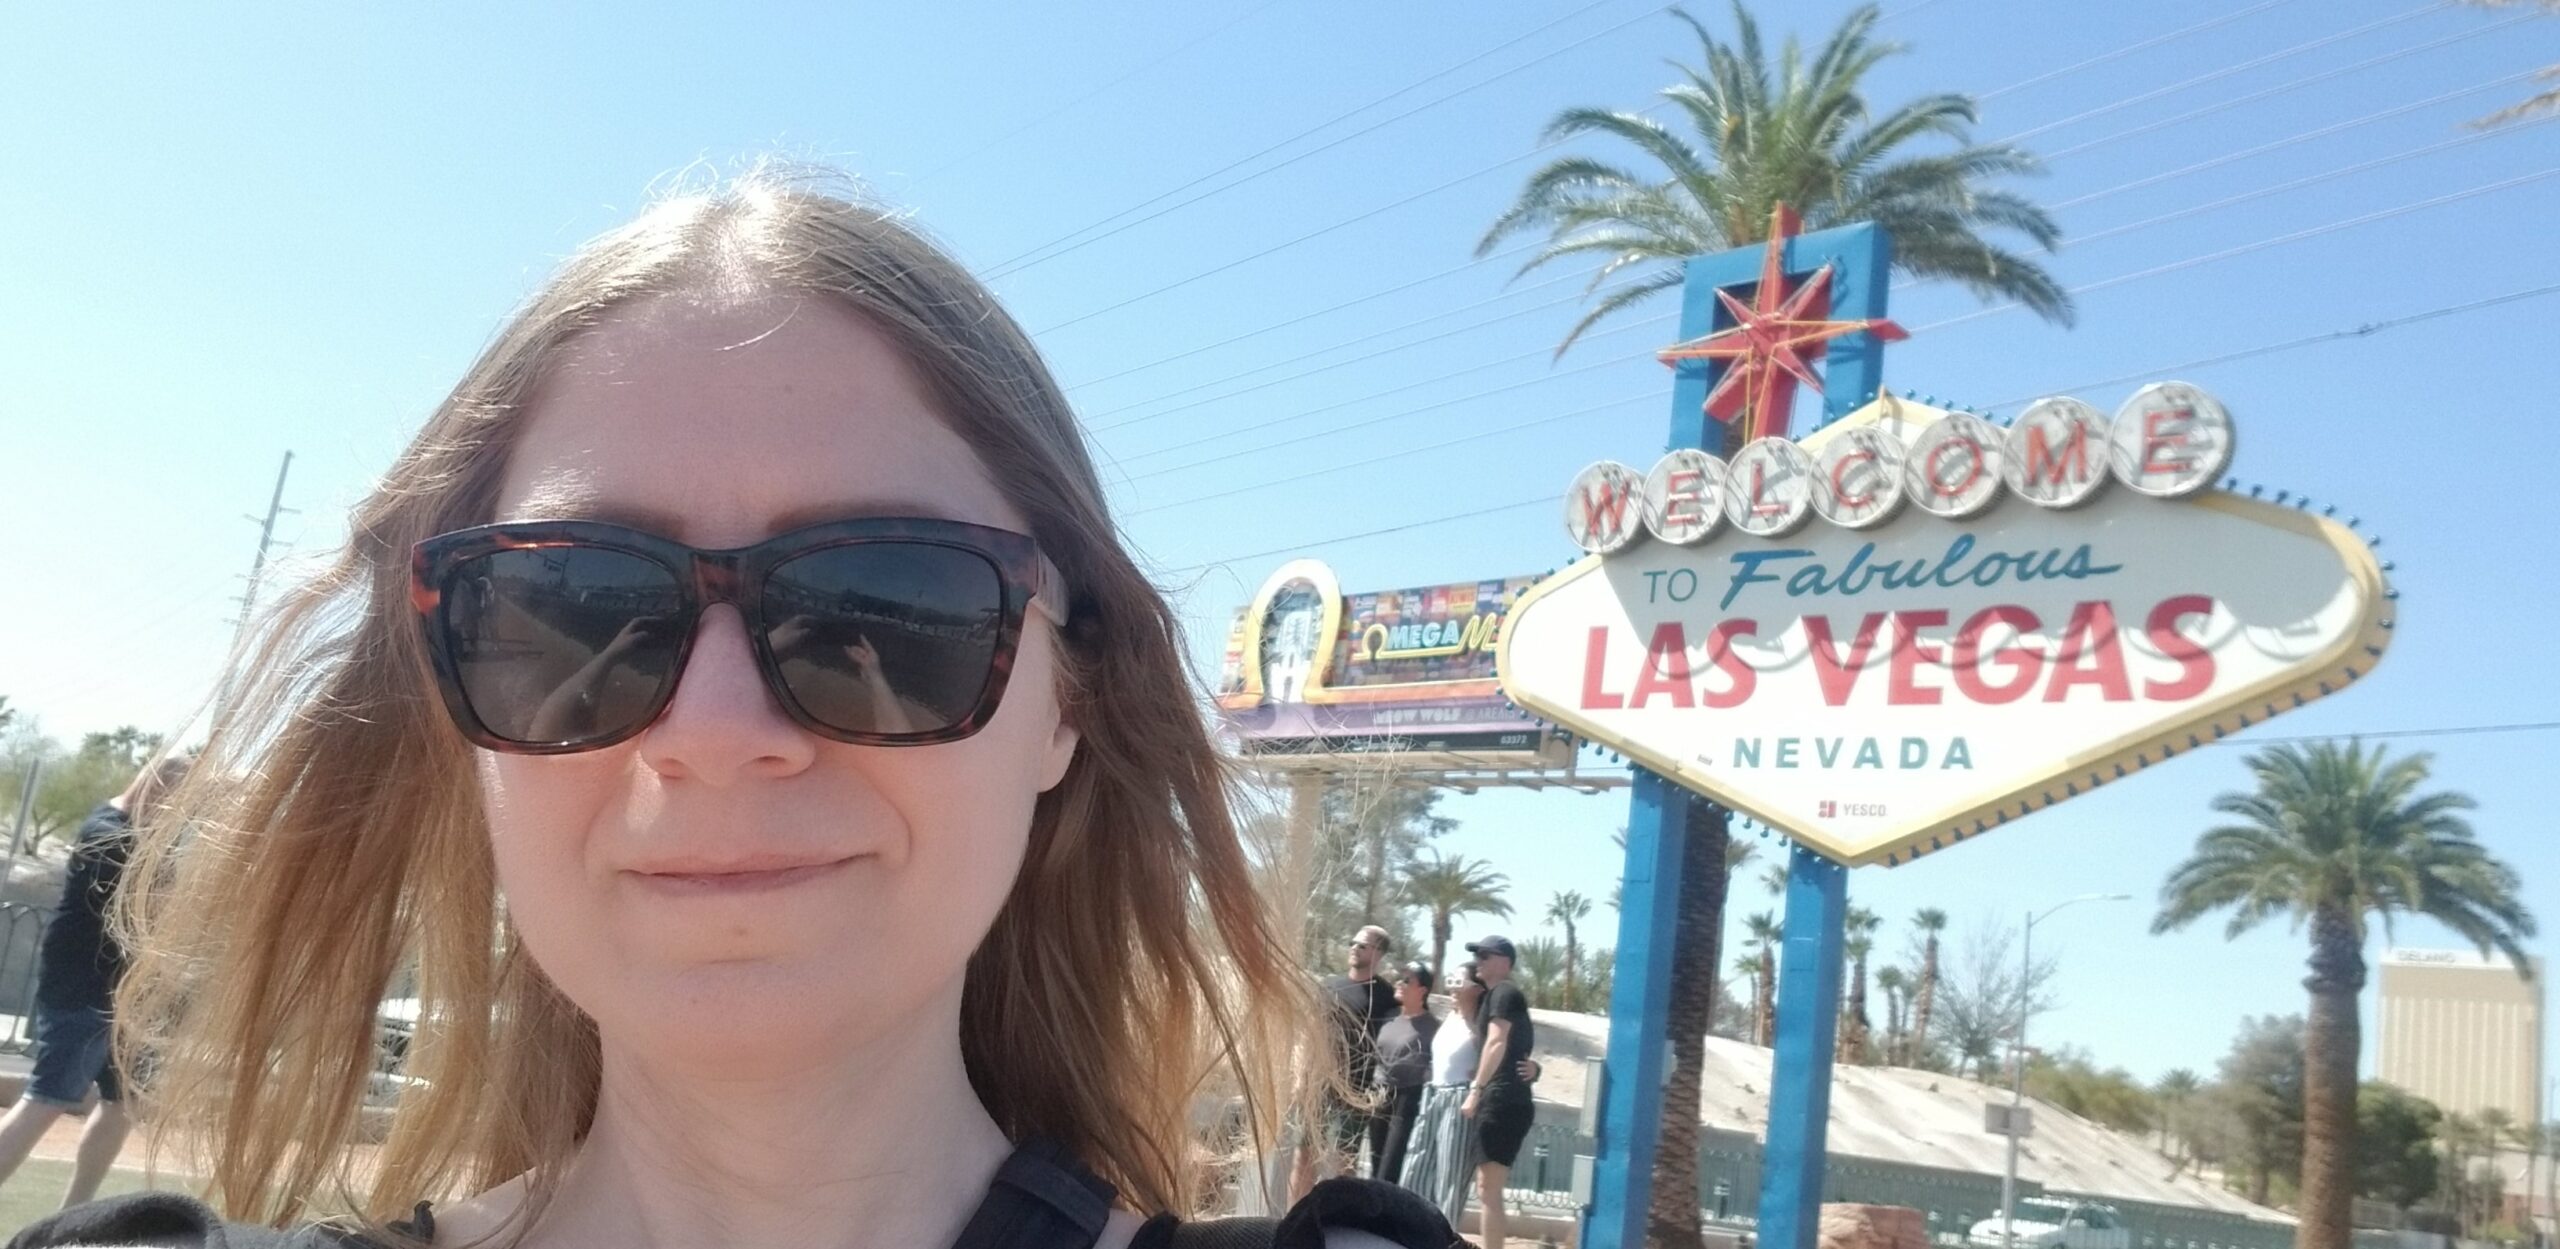 Image shows the author, an early forties caucasian female with medium length blonde hair, outside on a sunny day wearing sunglasses. The Las Vegas sign is behind her to the right.